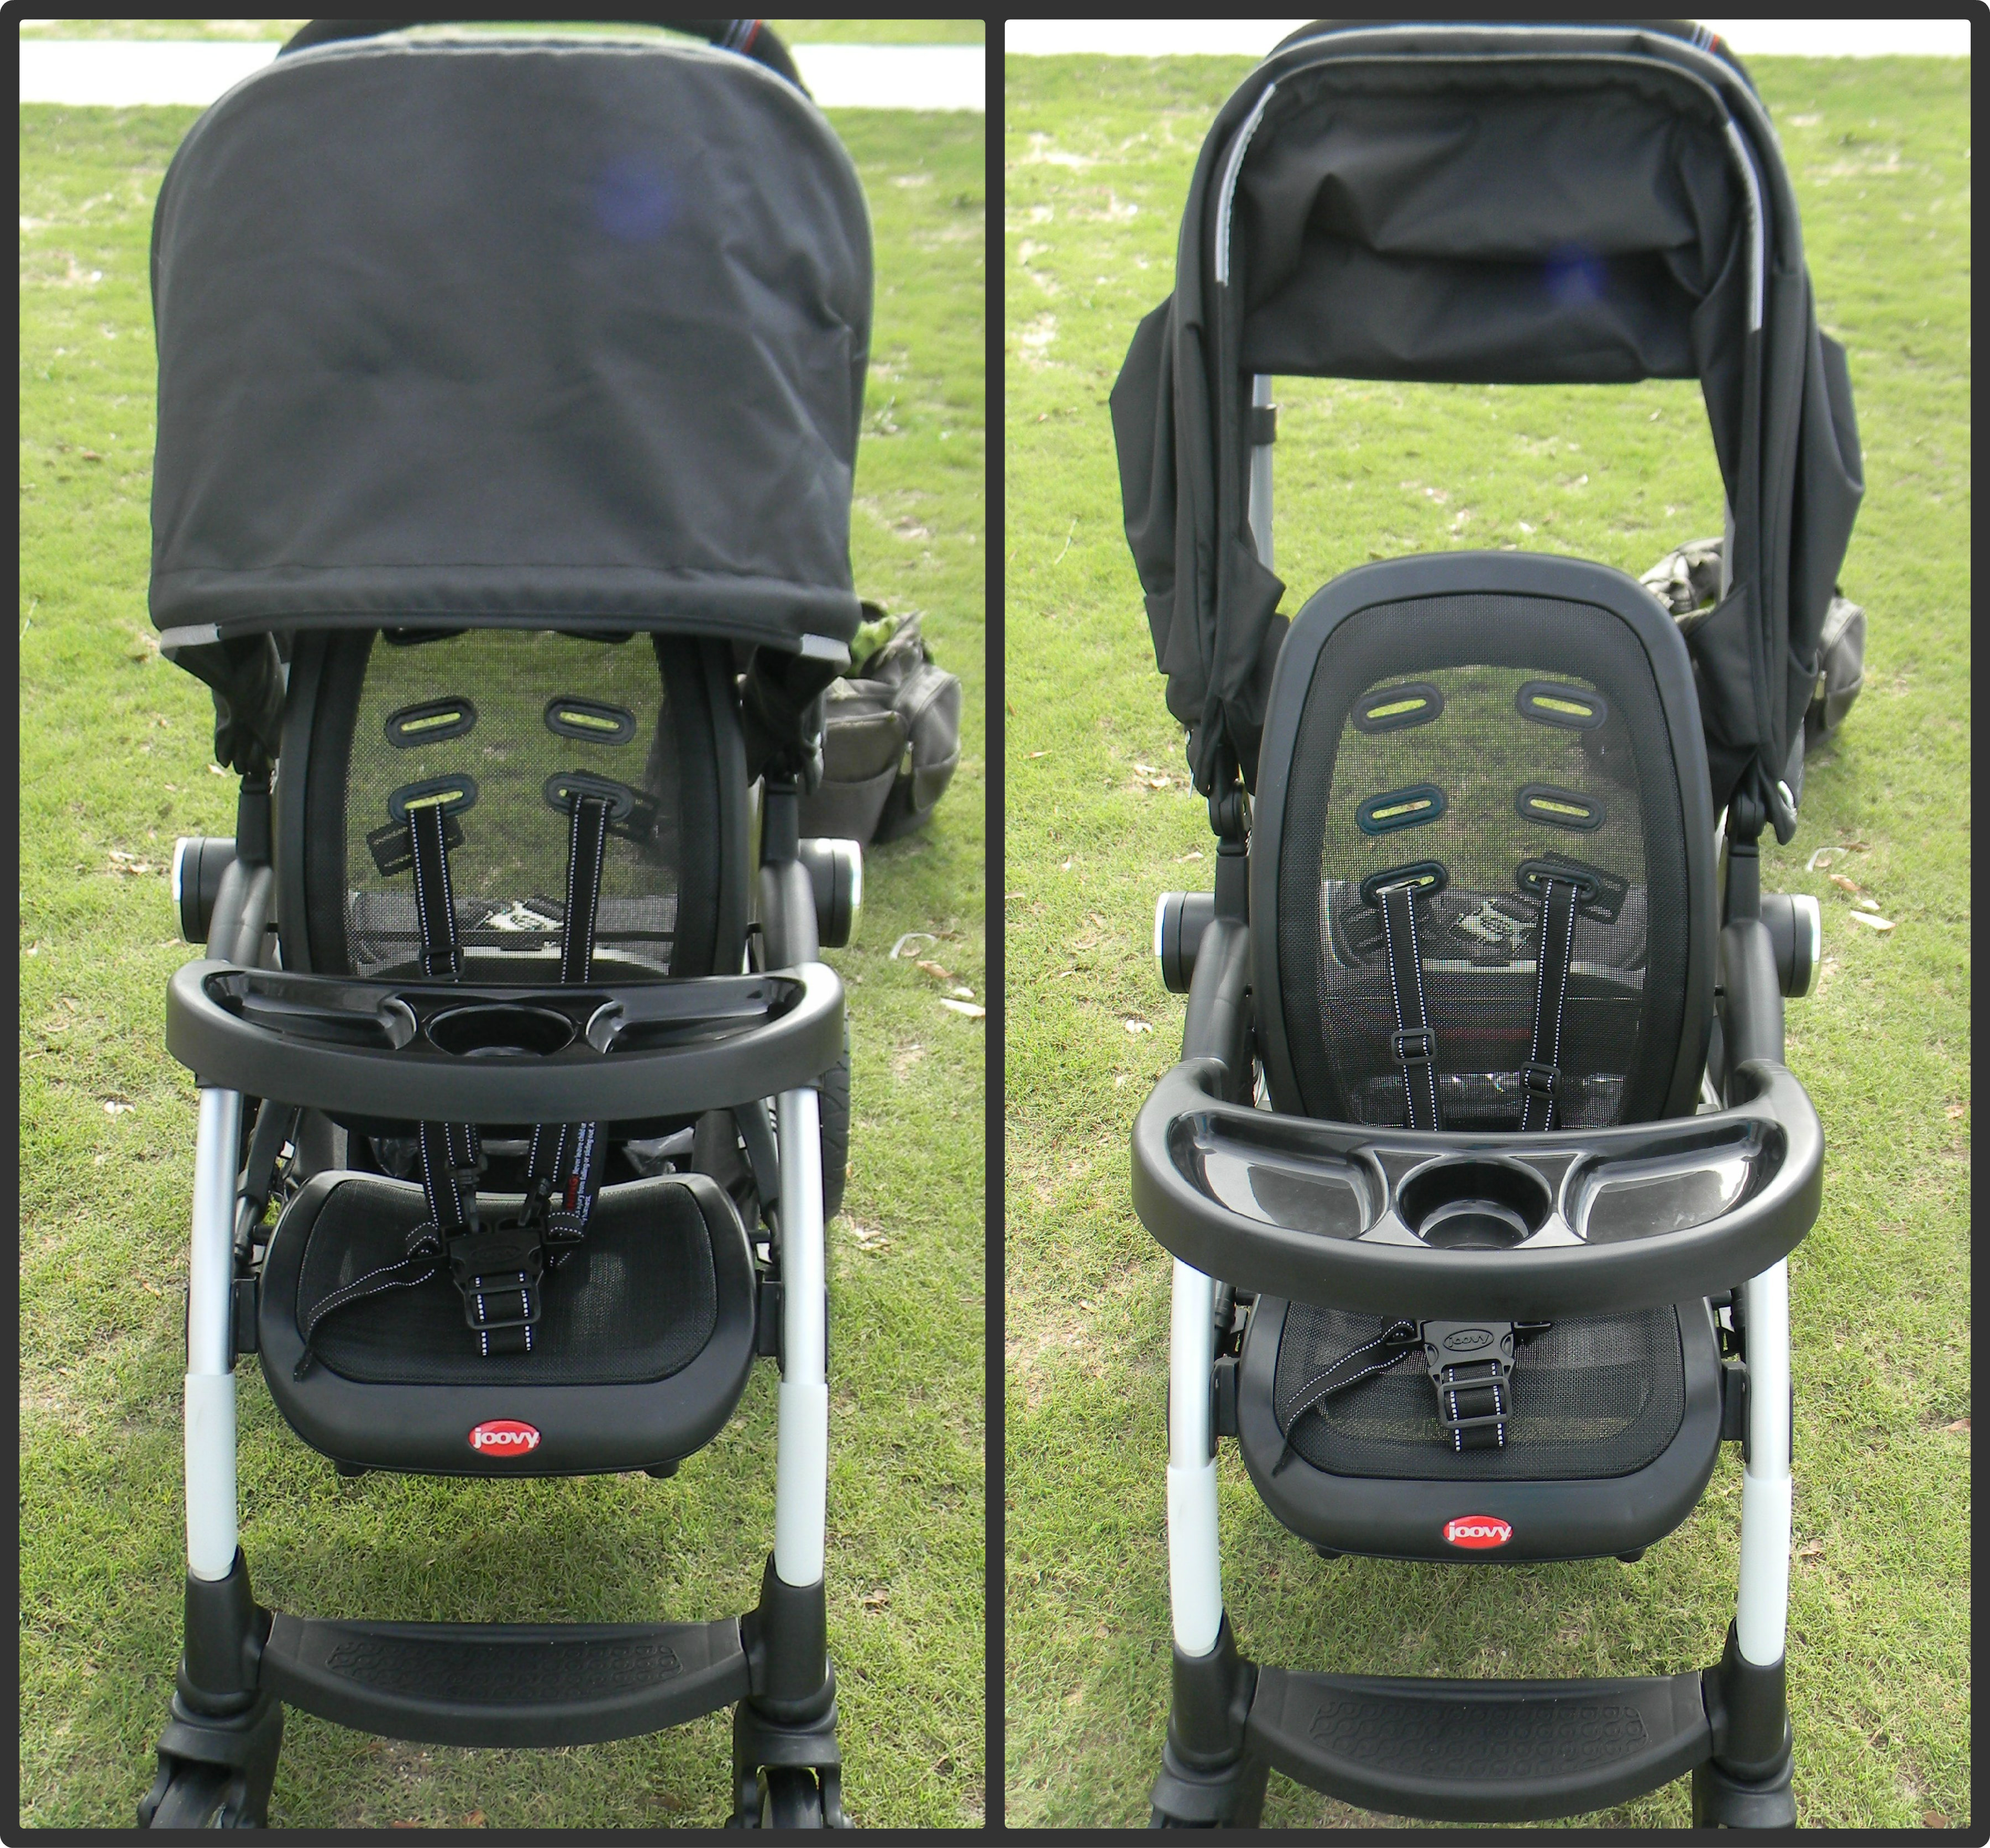 stroller with mesh back